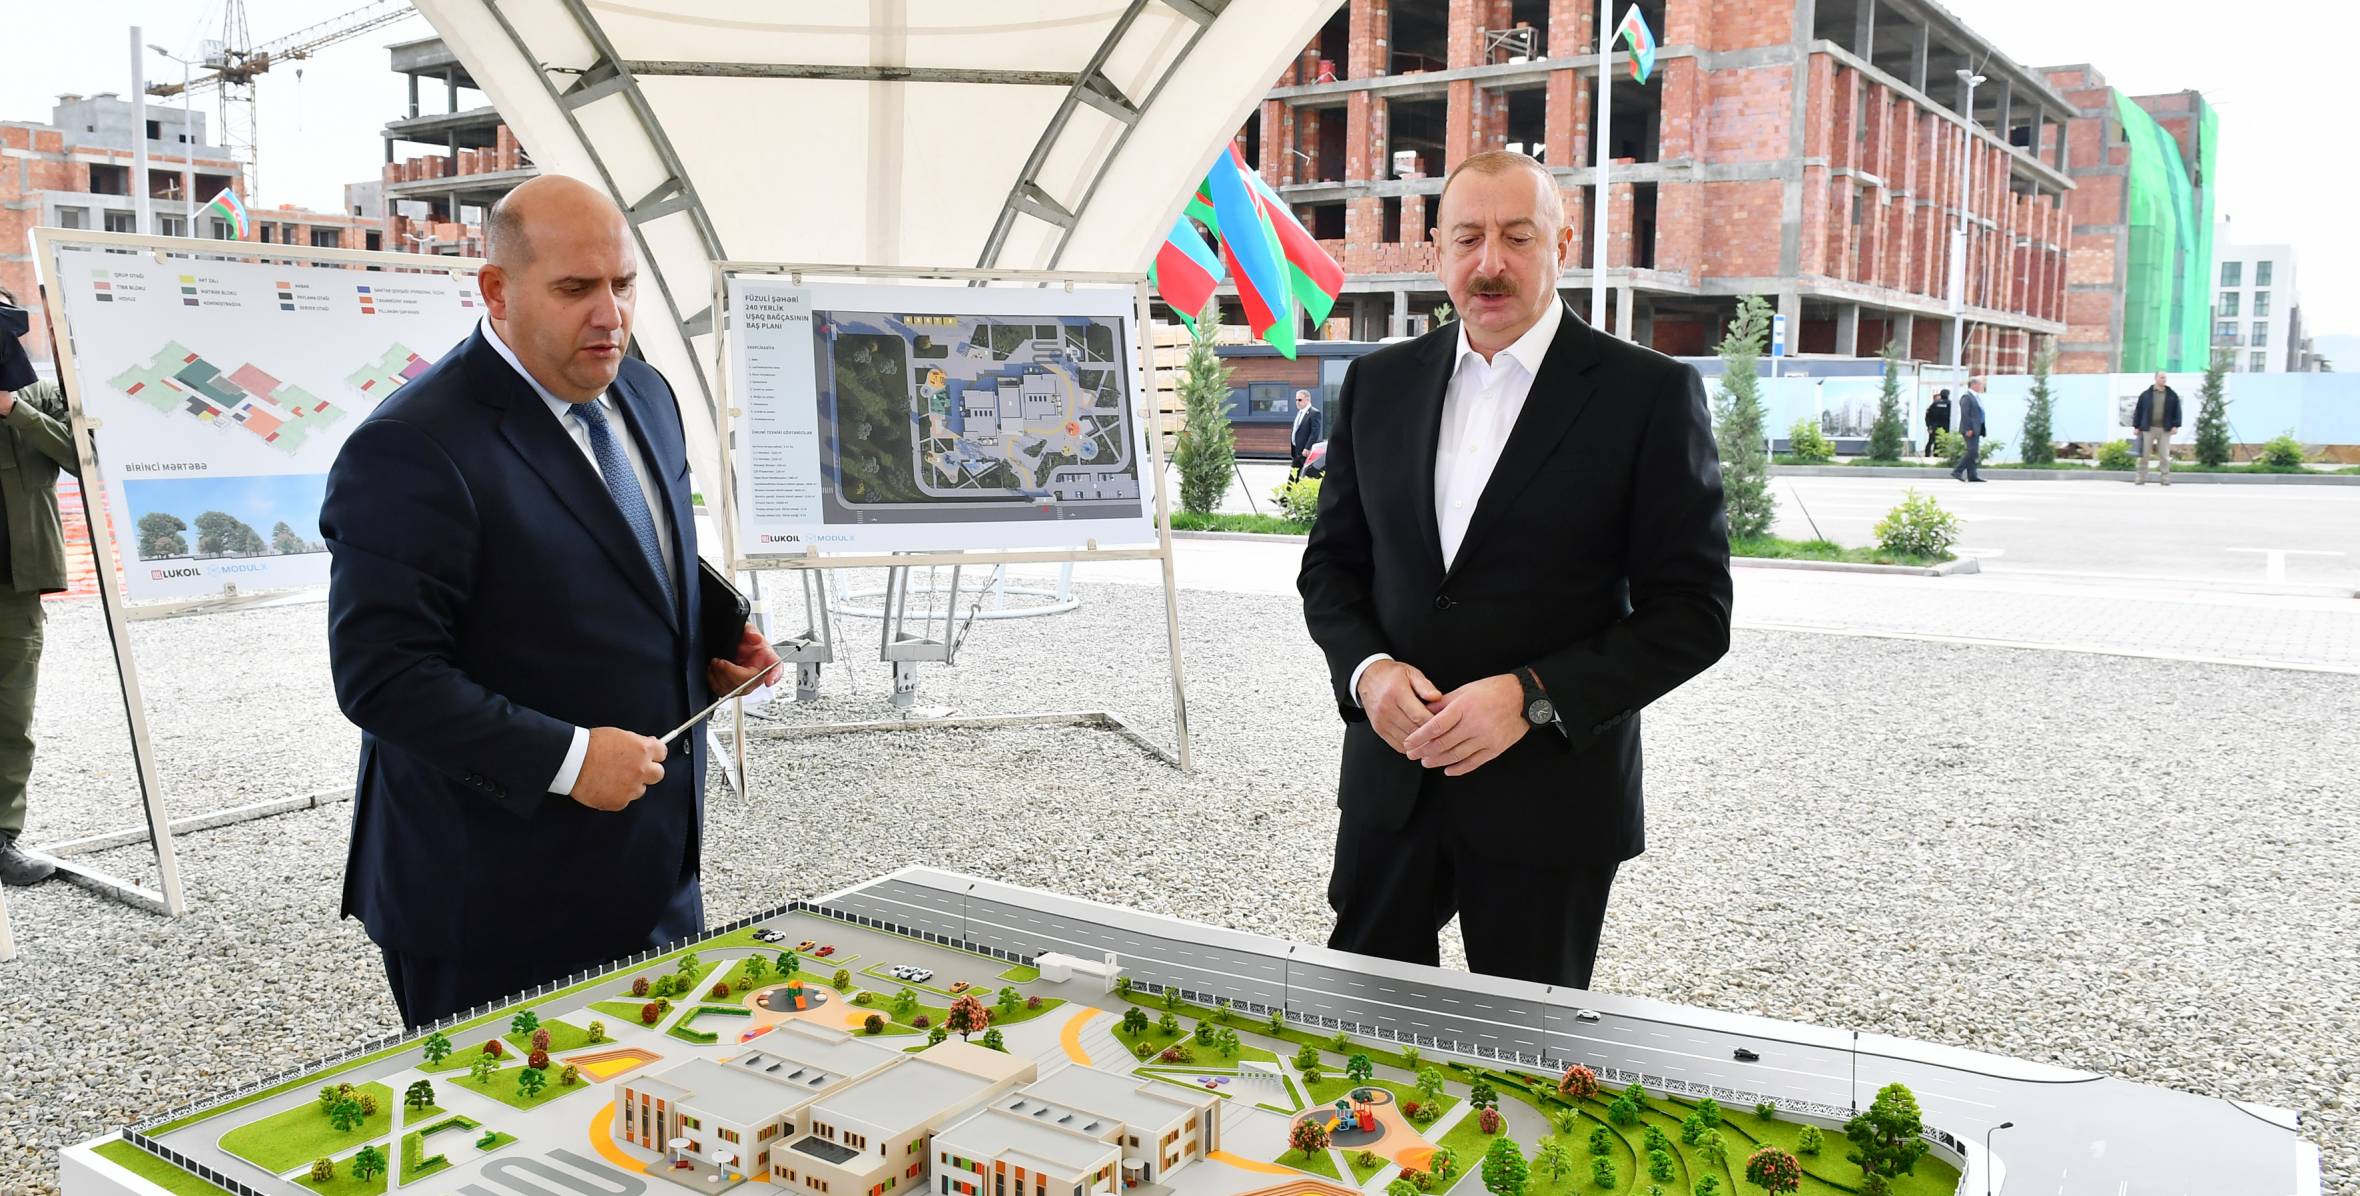 Ilham Aliyev has laid a foundation stone for a 240-seat kindergarten in the city of Fuzuli